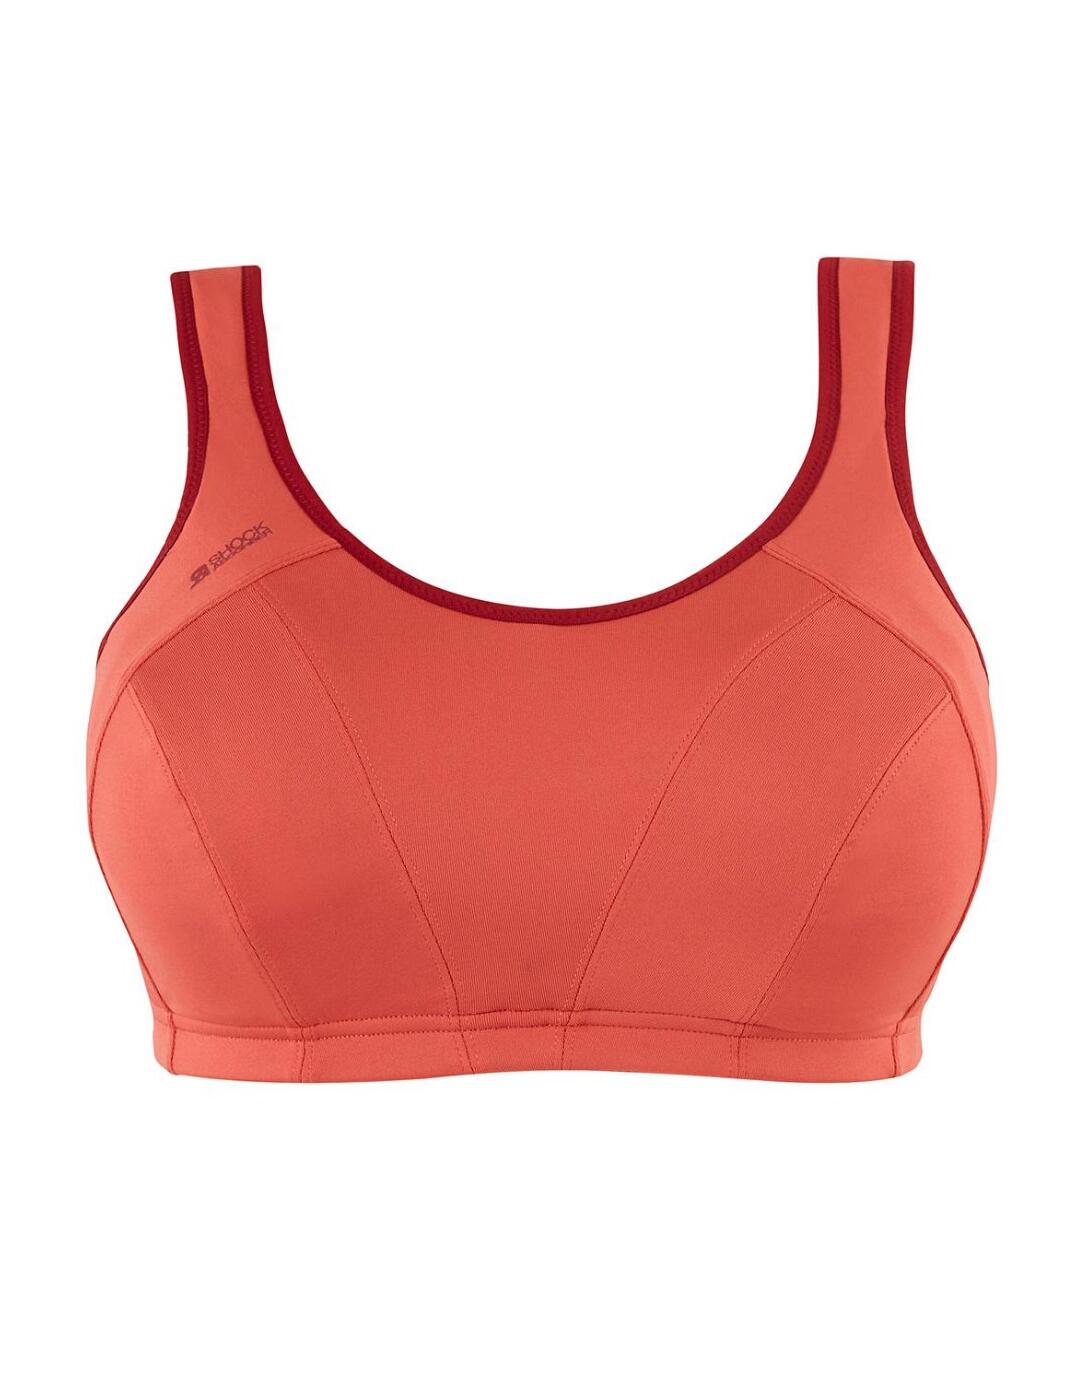 Shock Absorber Sports Bra Active Multi Size 30FF Level 4 Maximum Support  S4490